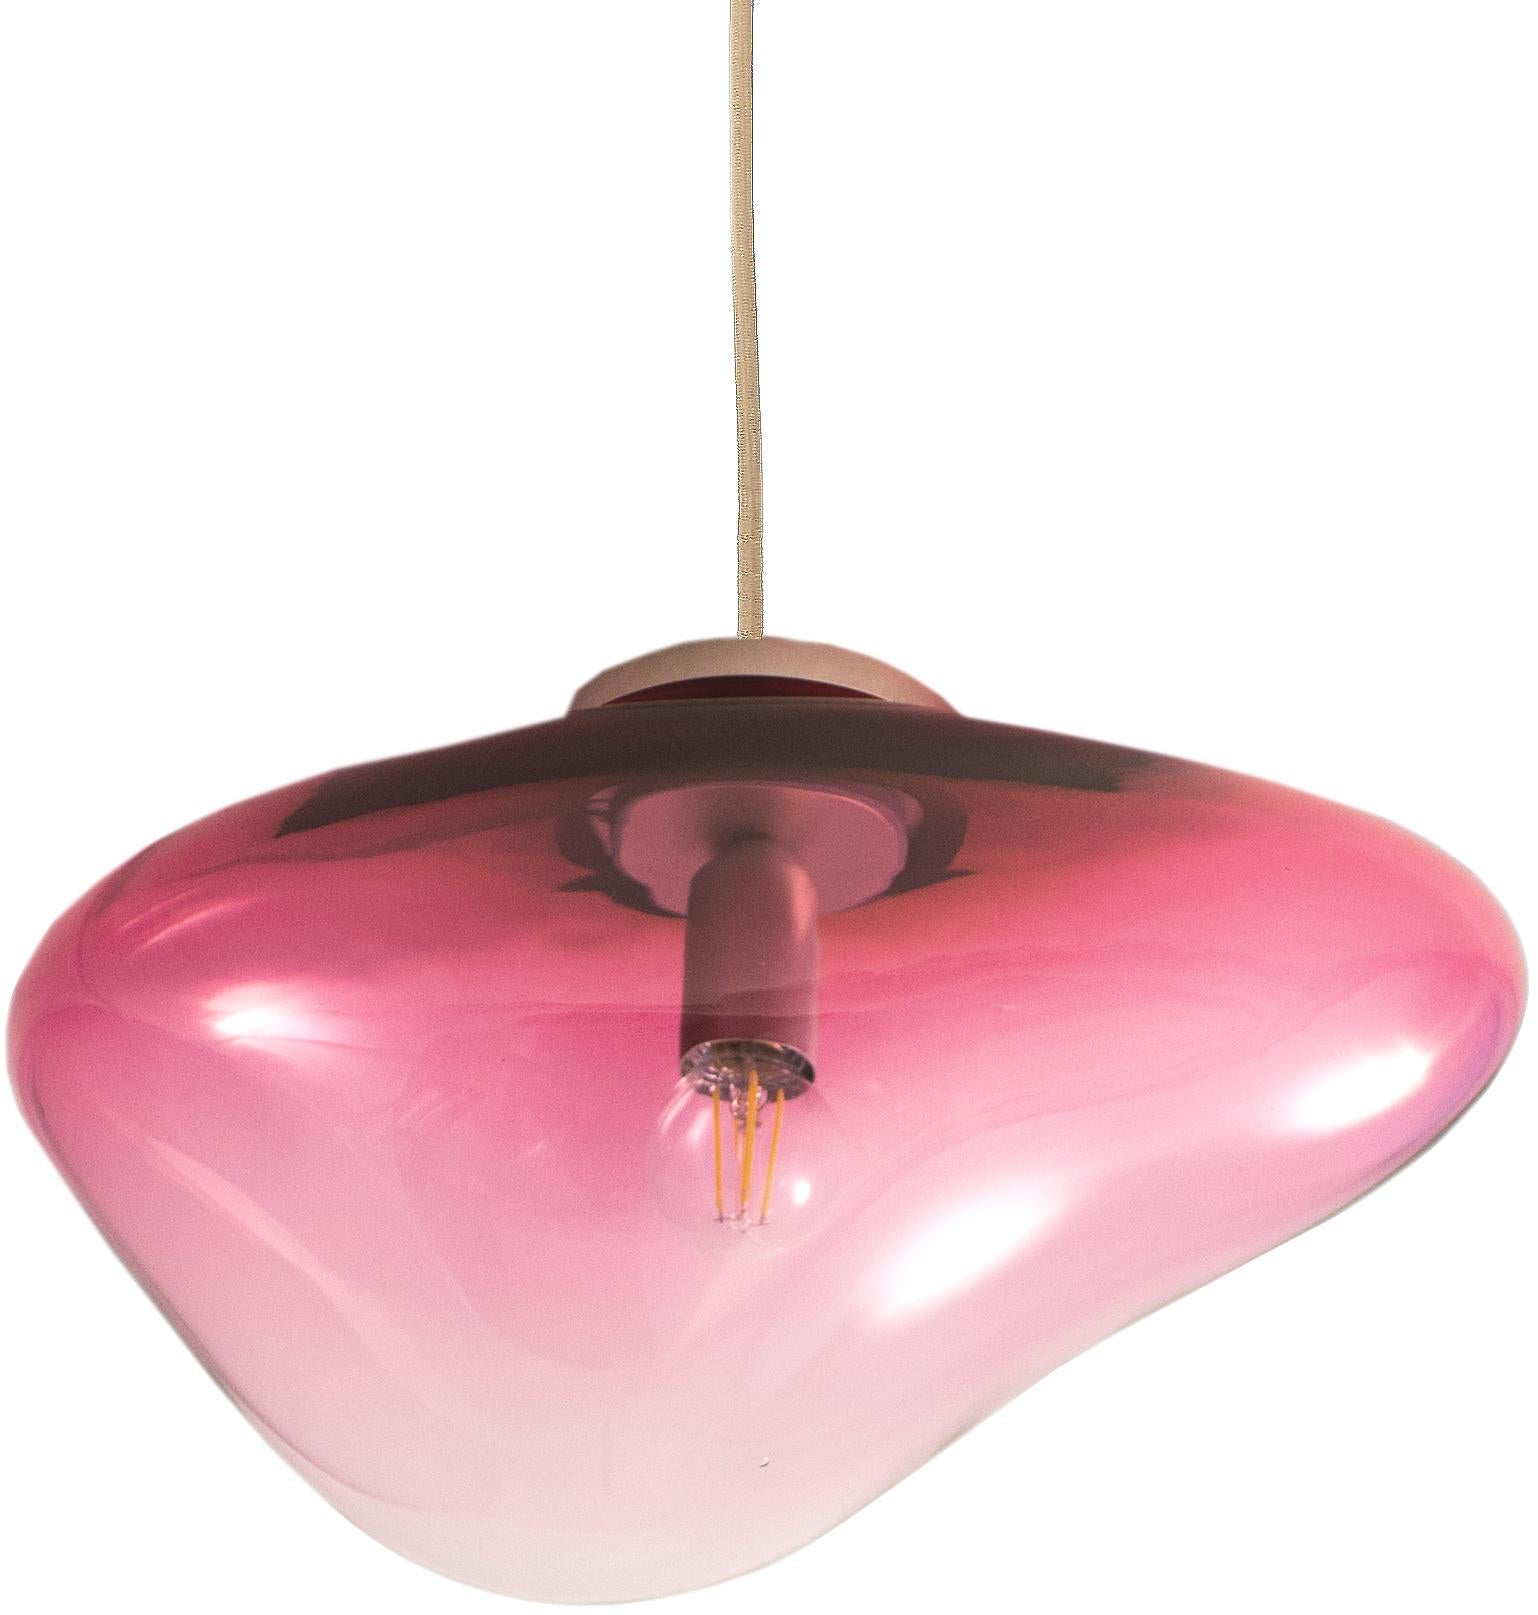 Planetoide Erosi Brilliant ruby pendant by ELOA
Material: Glass, steel, silver, LED bulb
Dimensions: D 30 x W 30 x H 250 cm
Also available in different colours and dimensions.

All our lamps can be wired according to each country. If sold to